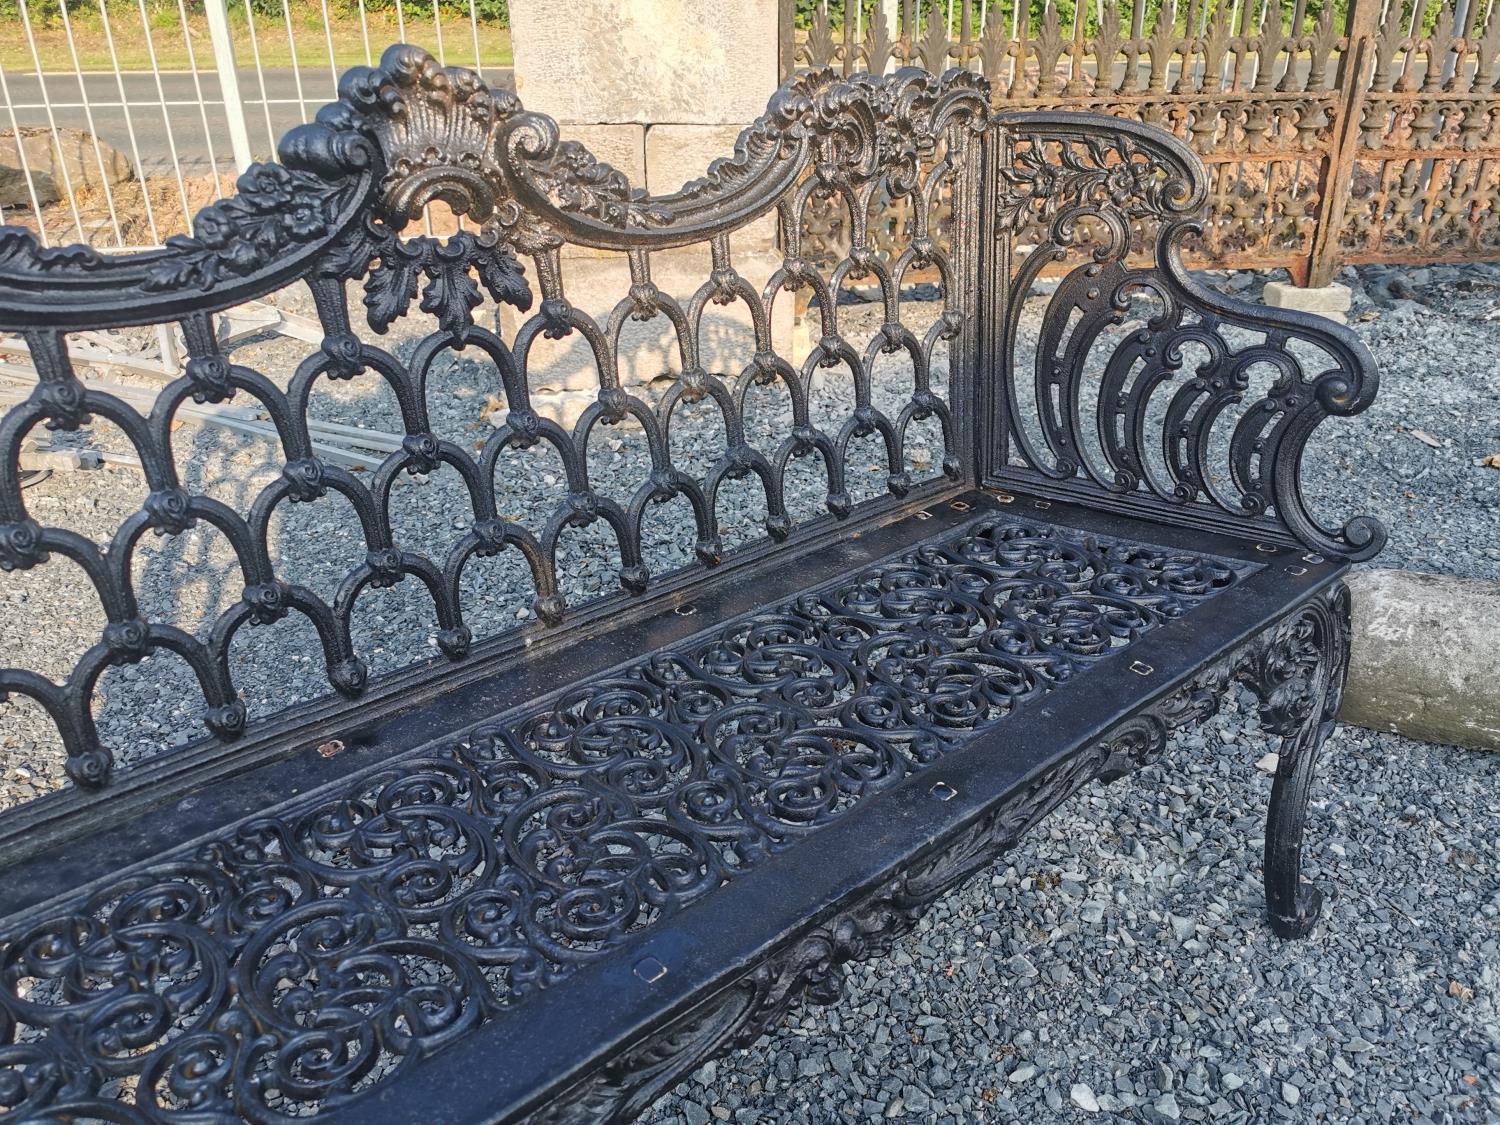 Decorative cast iron garden bench in the Rococo style - Image 2 of 2